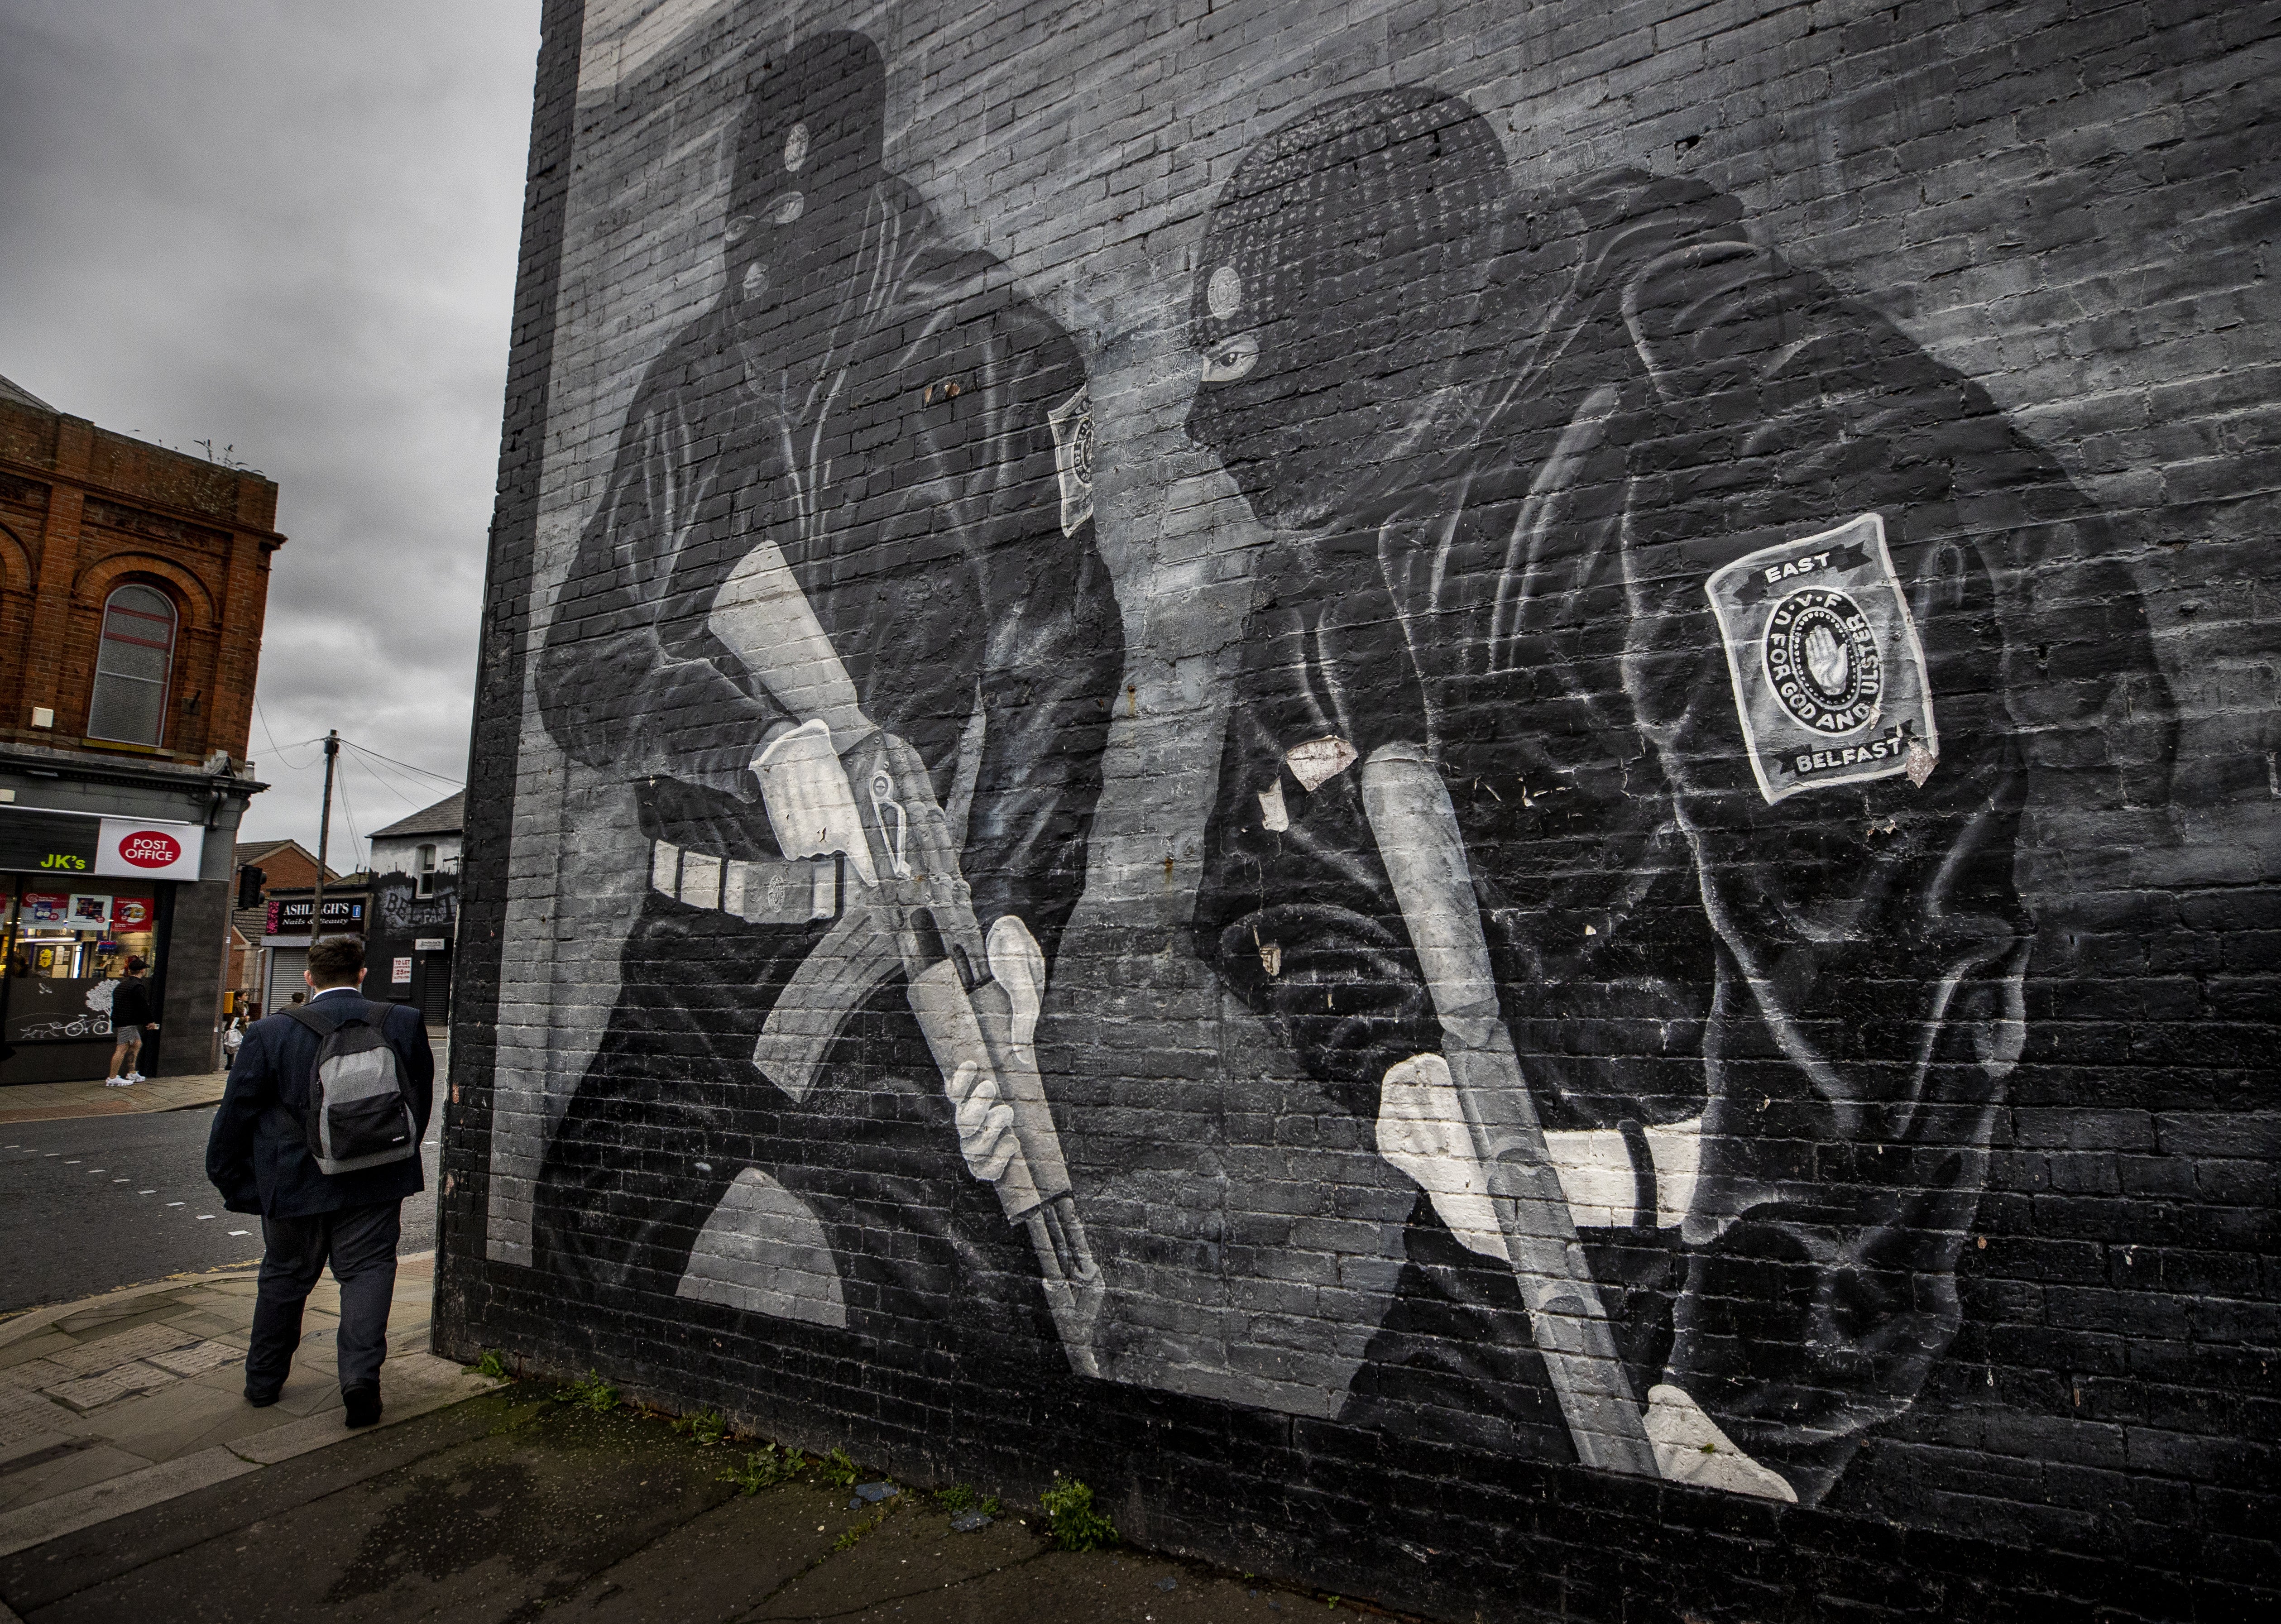 An Ulster Volunteer Force mural in support of the loyalist paramilitary group is seen on the wall of a property on the Lower Newtownards Road in east Belfast (Liam McBurney/PA)